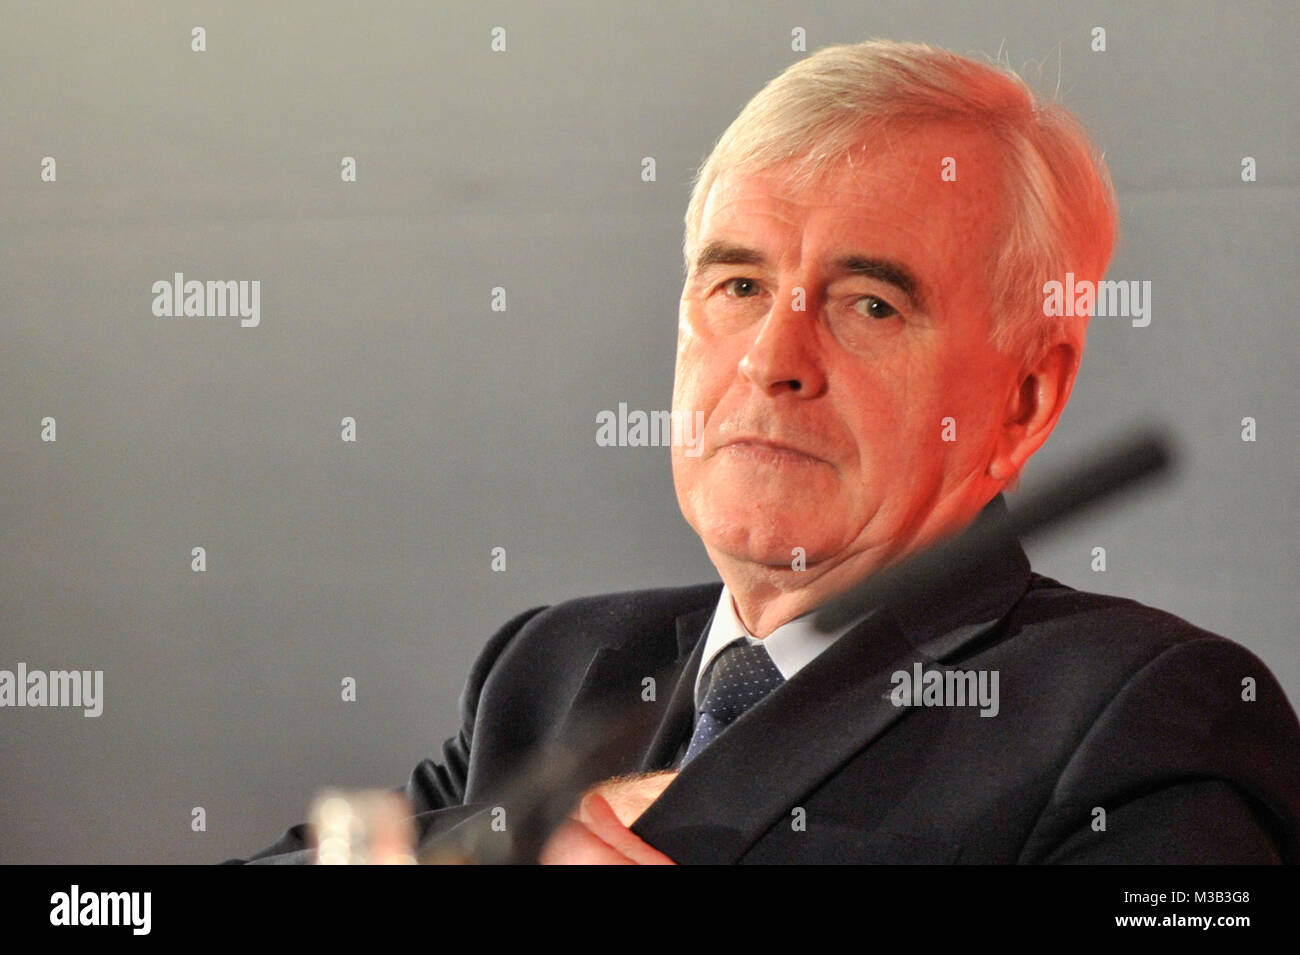 London, UK.  10 February 2018.  John McDonnell, Shadow Chancellor, speaks about expanding public and democratic ownership in the economy following the collapse of Carillion during a Labour Party conference at The Grand Connaught Rooms in Covent Garden.   Credit: Stephen Chung / Alamy Live News Stock Photo